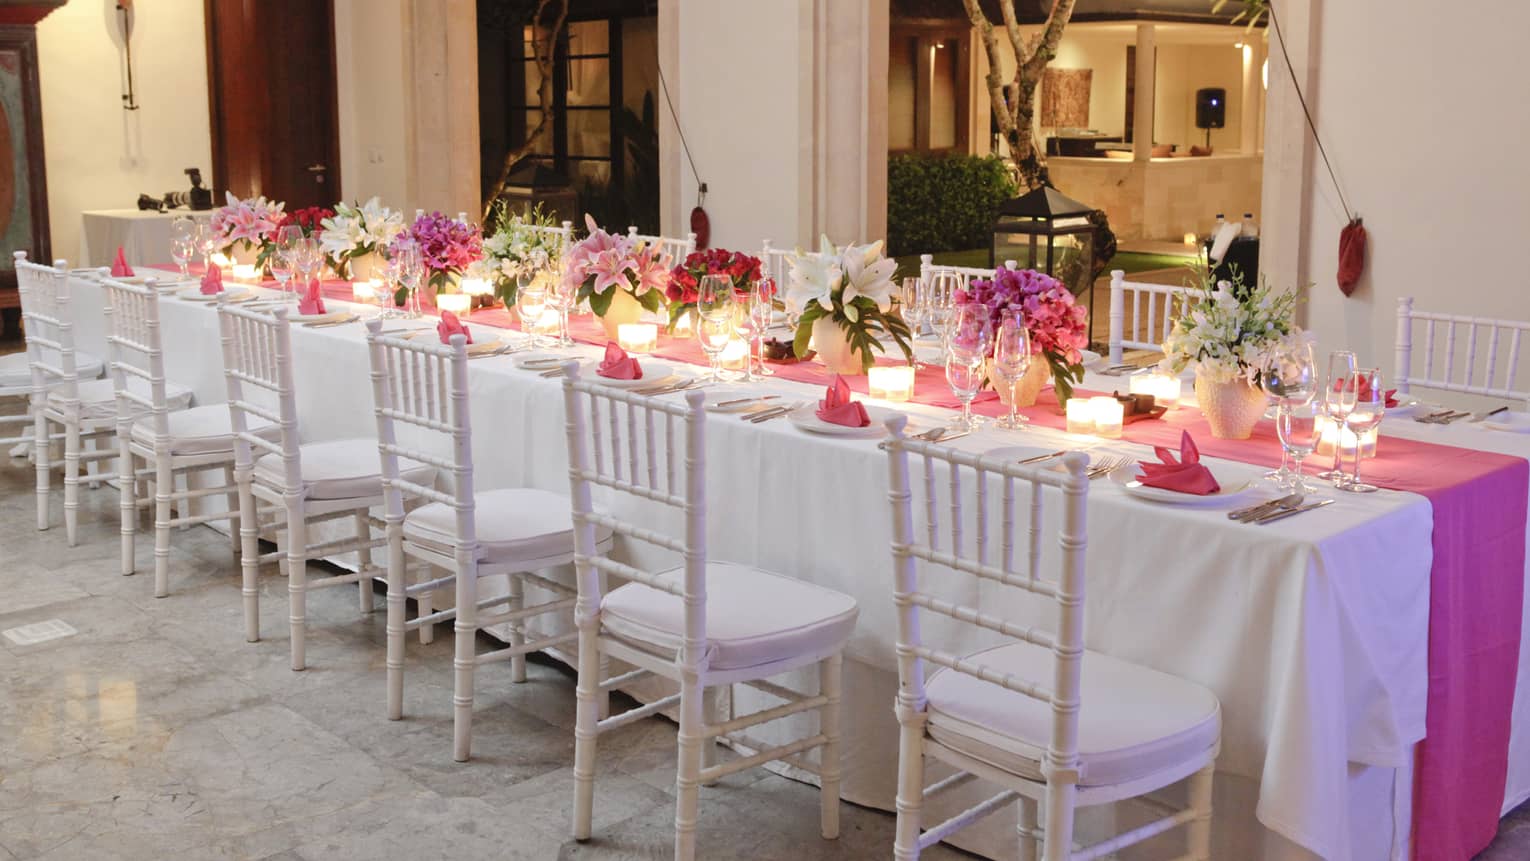 Residence Villa reception dinner, long banquet table with pink linens and flowers